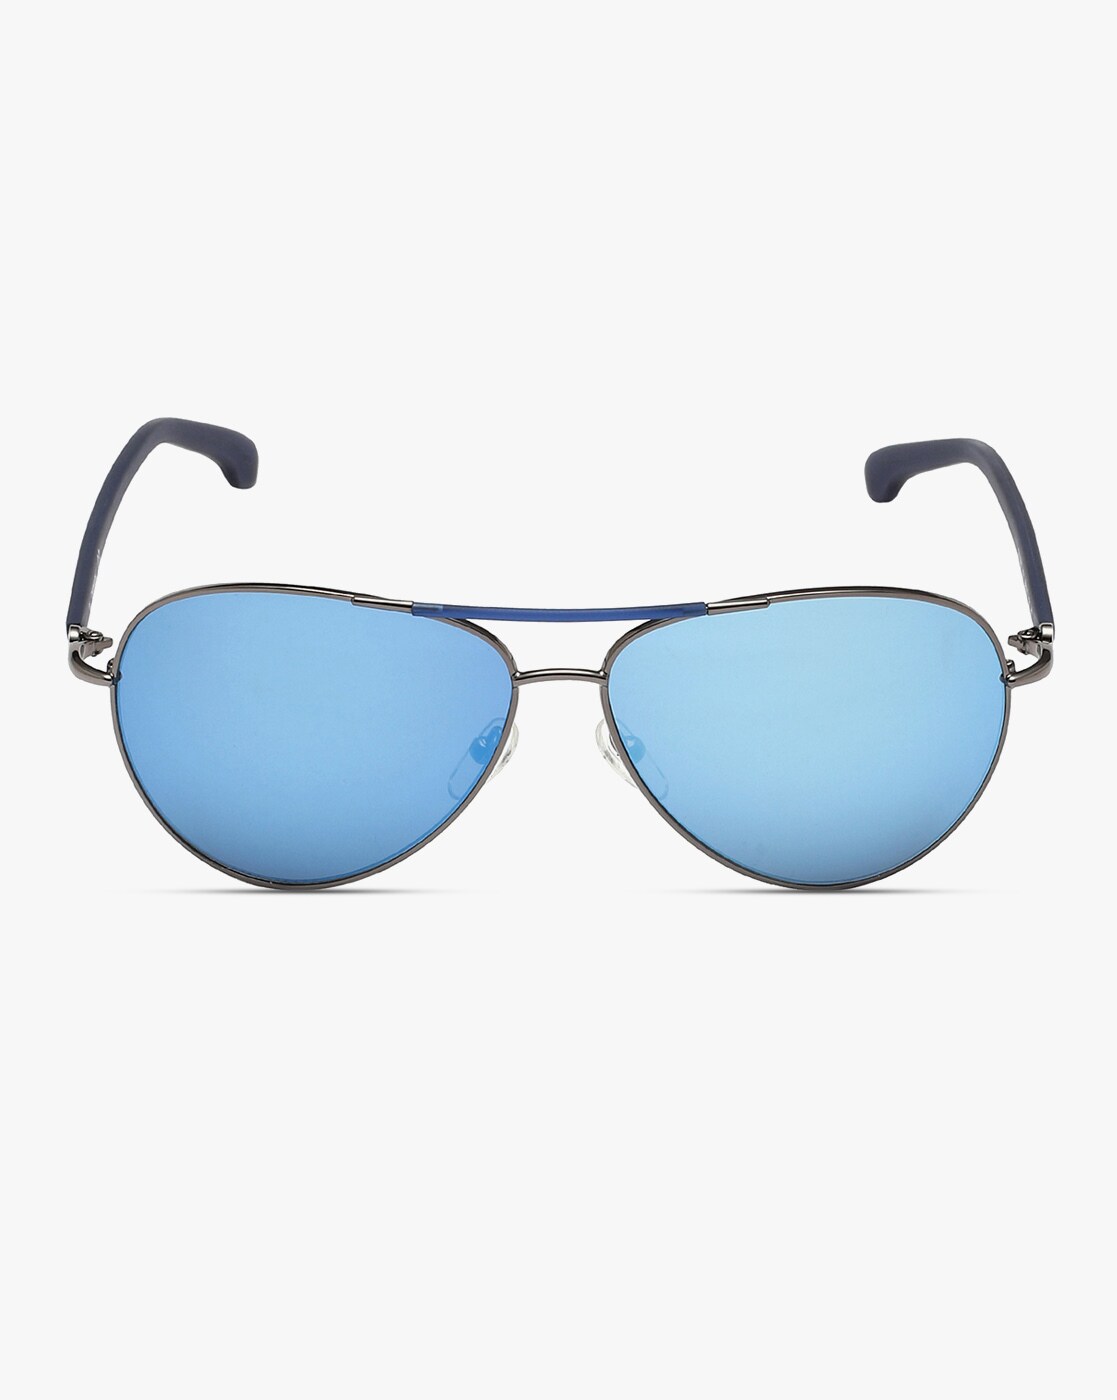 Buy Ray-Ban 0RB3025 Light Blue Polarized Icons Aviator - 58 mm Online